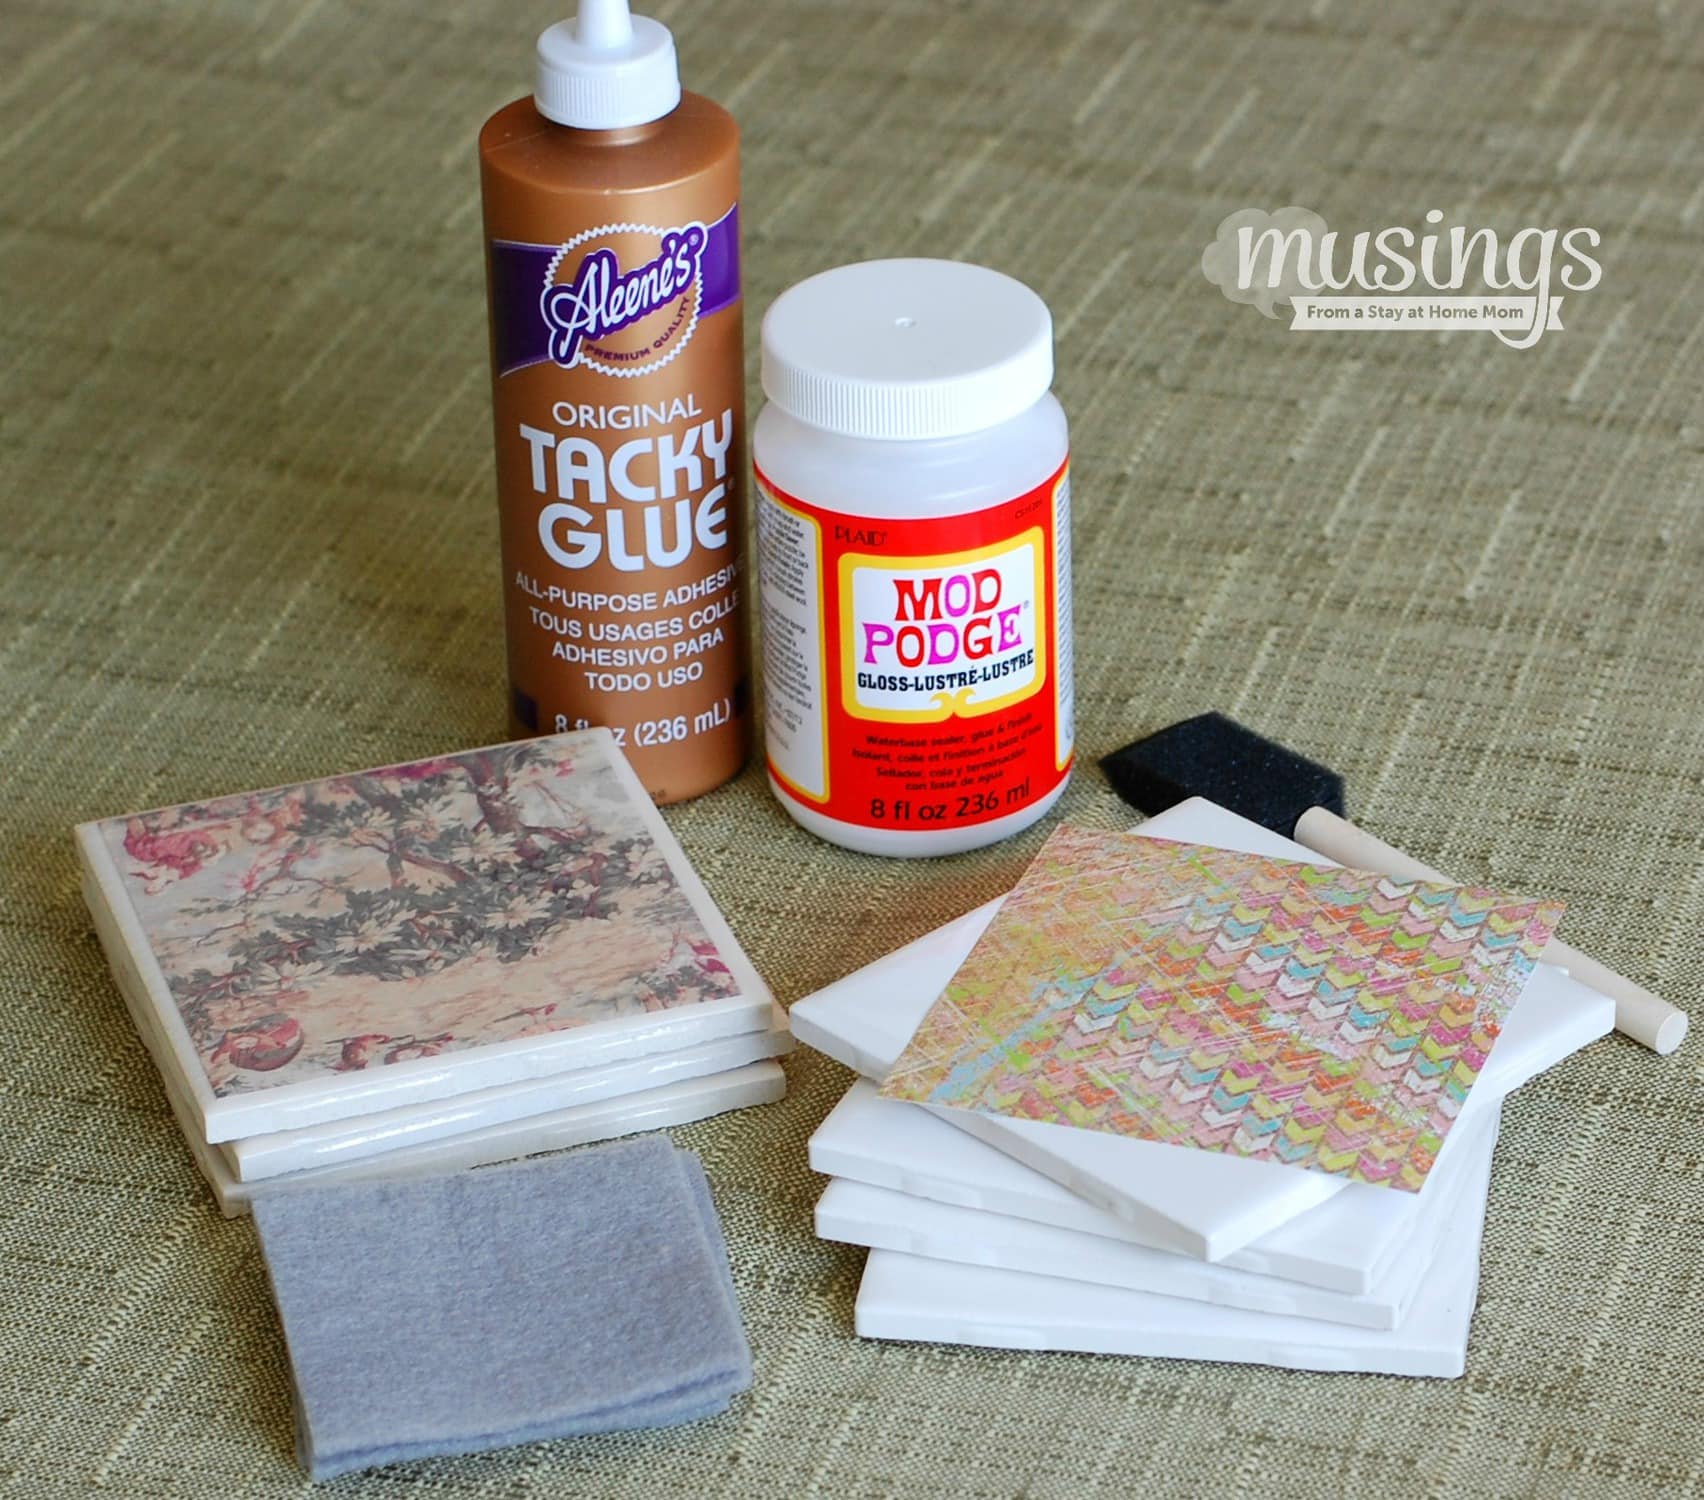 You'll love how easy these inexpensive DIY Tile Coasters are to make, plus you can personalize them with color/decor to match any room. They're a great homemade gift idea too!